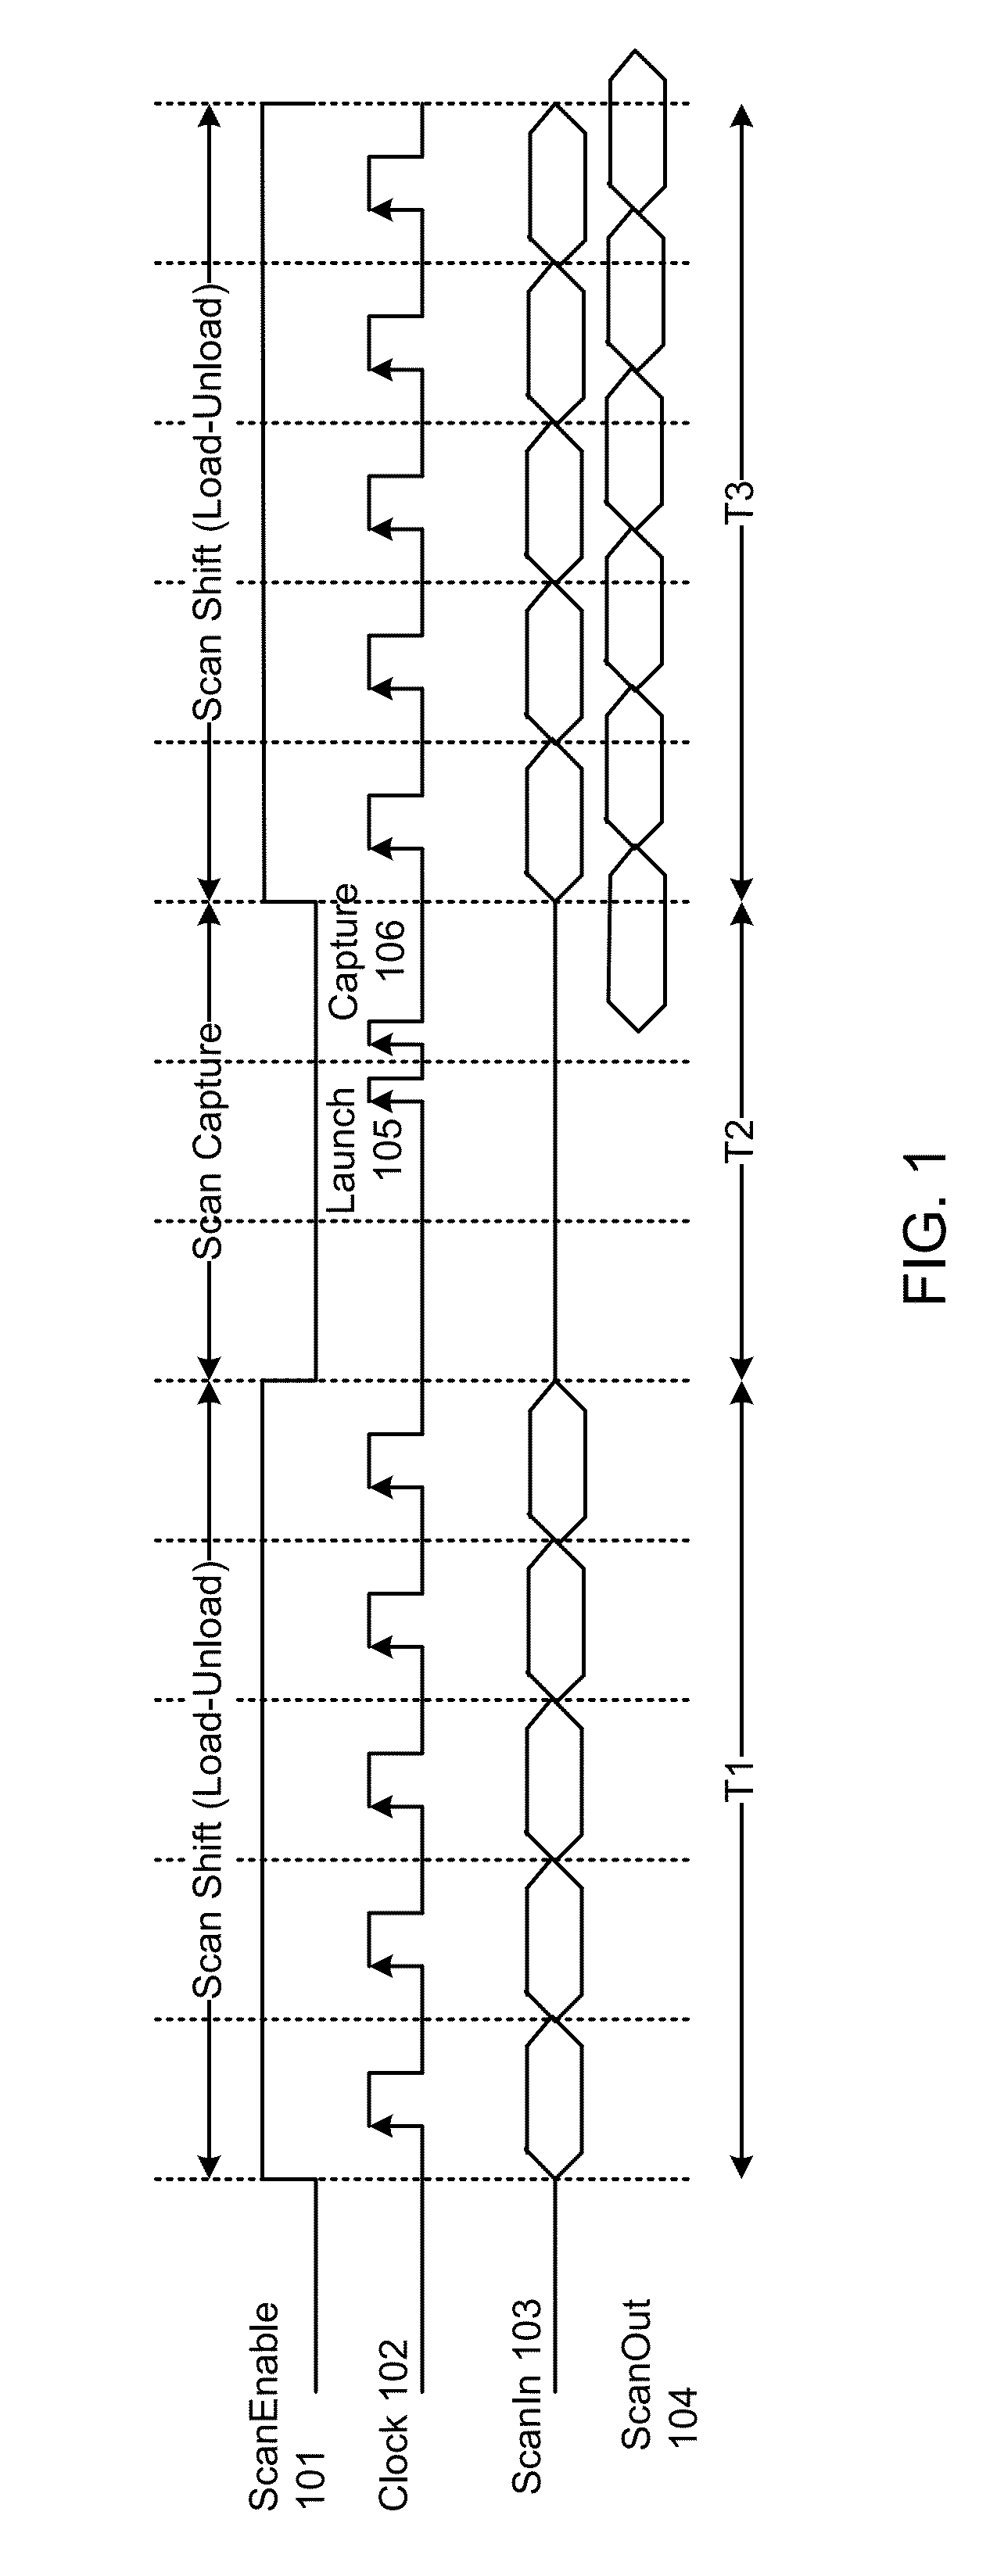 Global low power capture scheme for cores